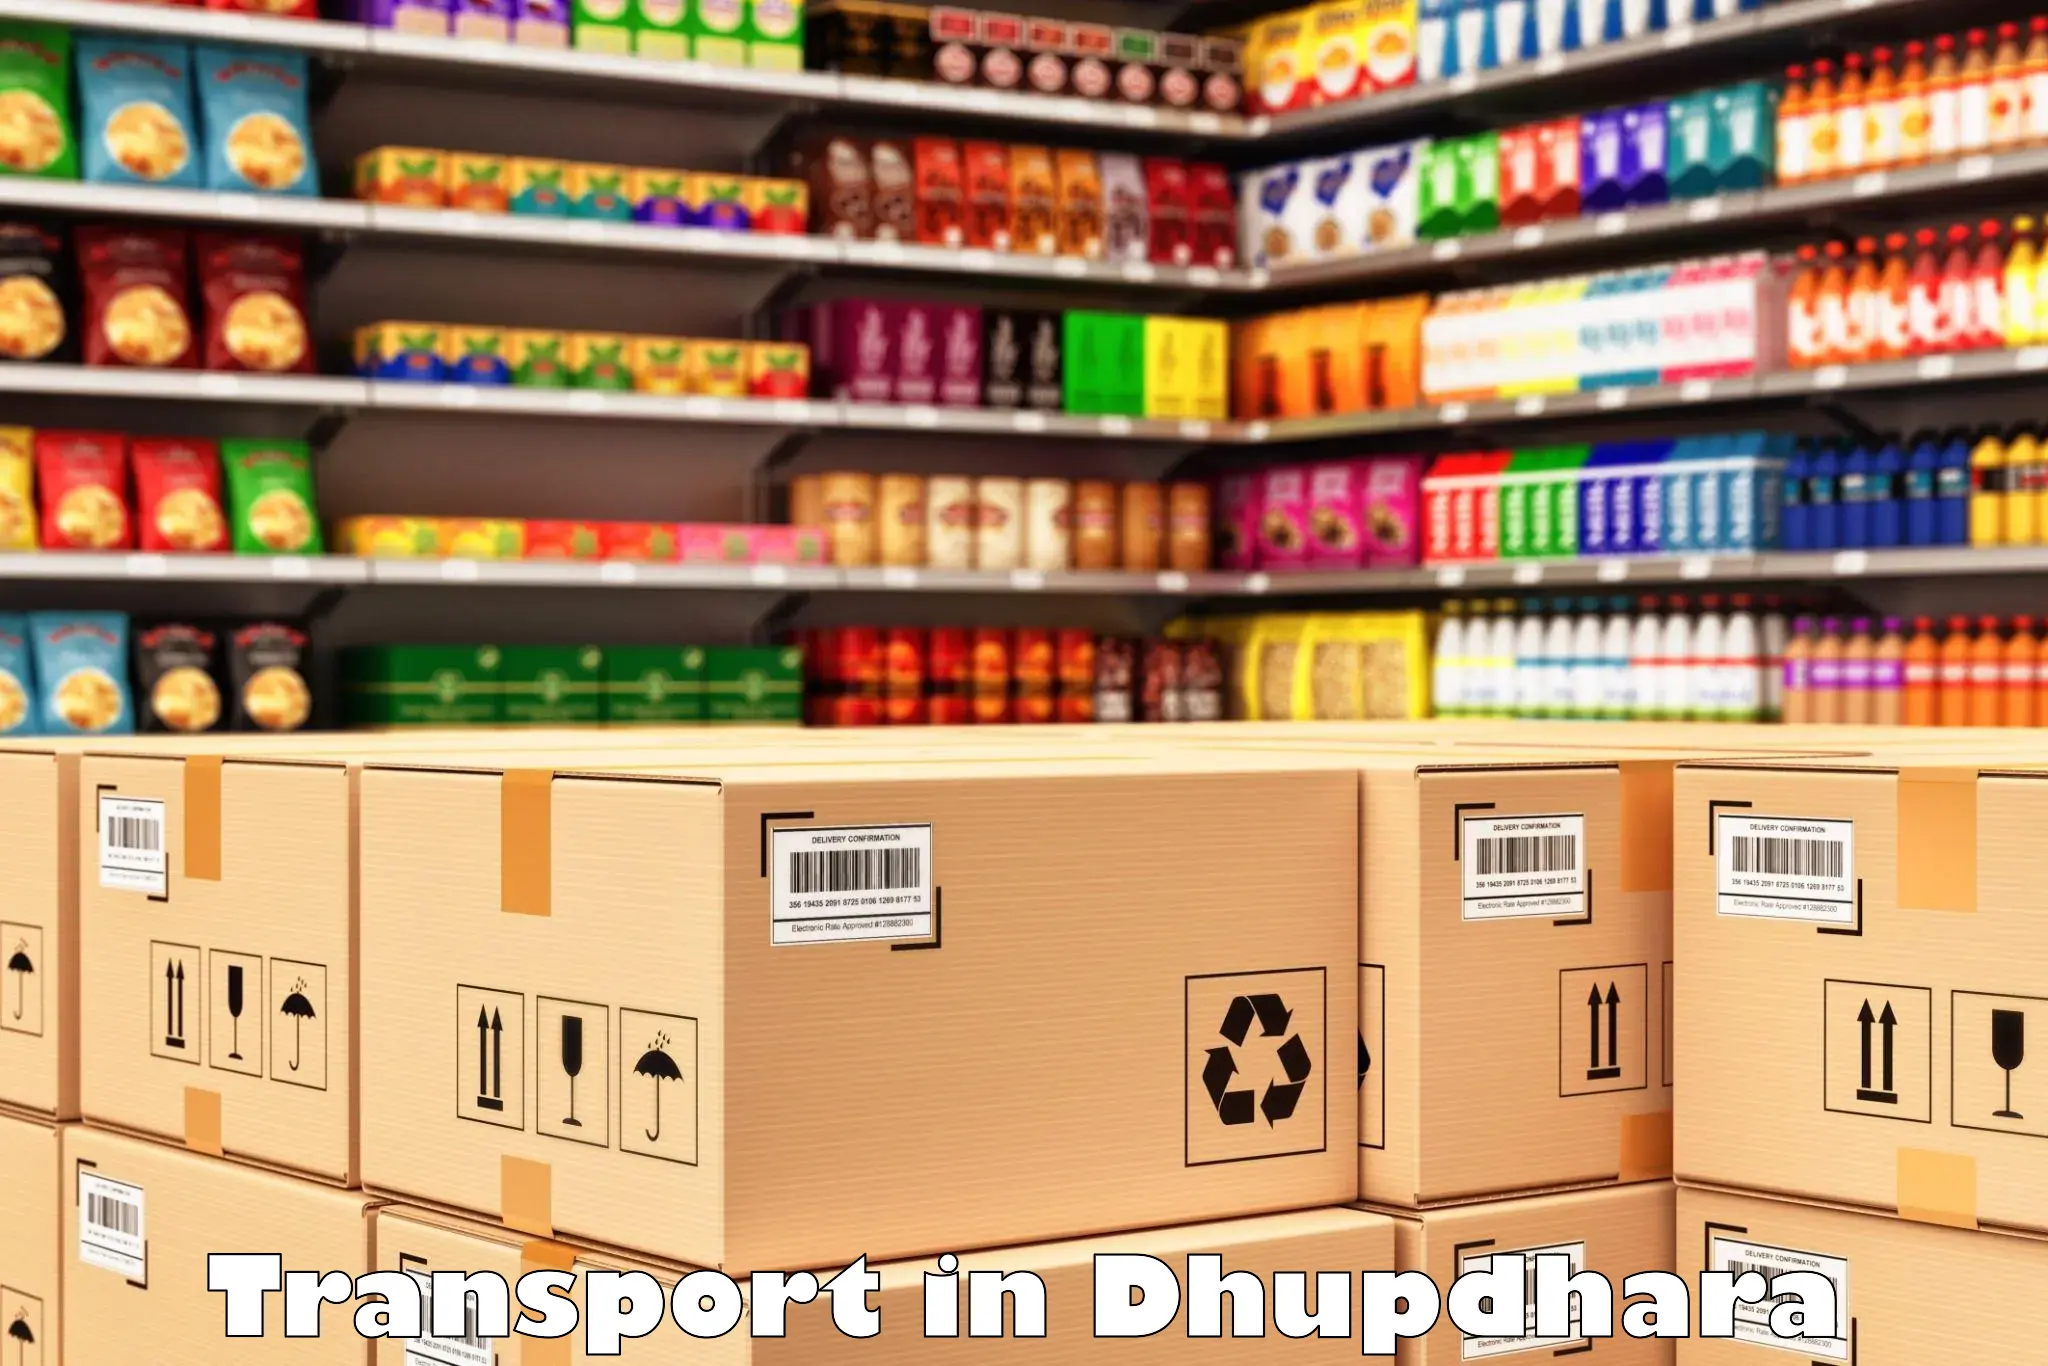 Express transport services in Dhupdhara